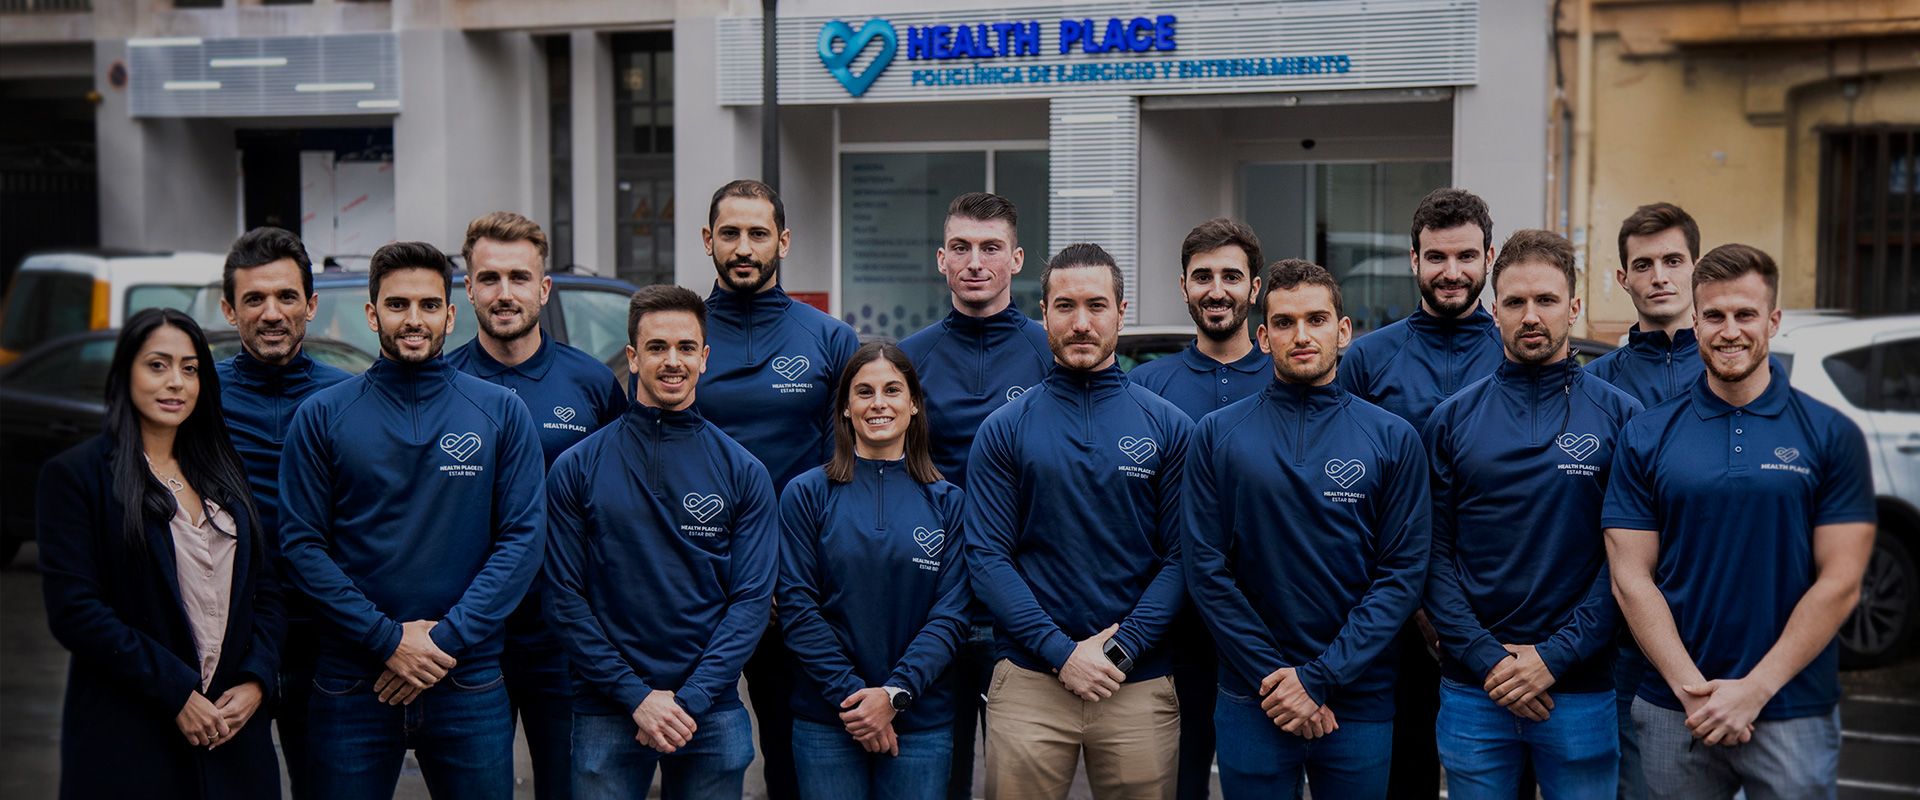 equipo health place